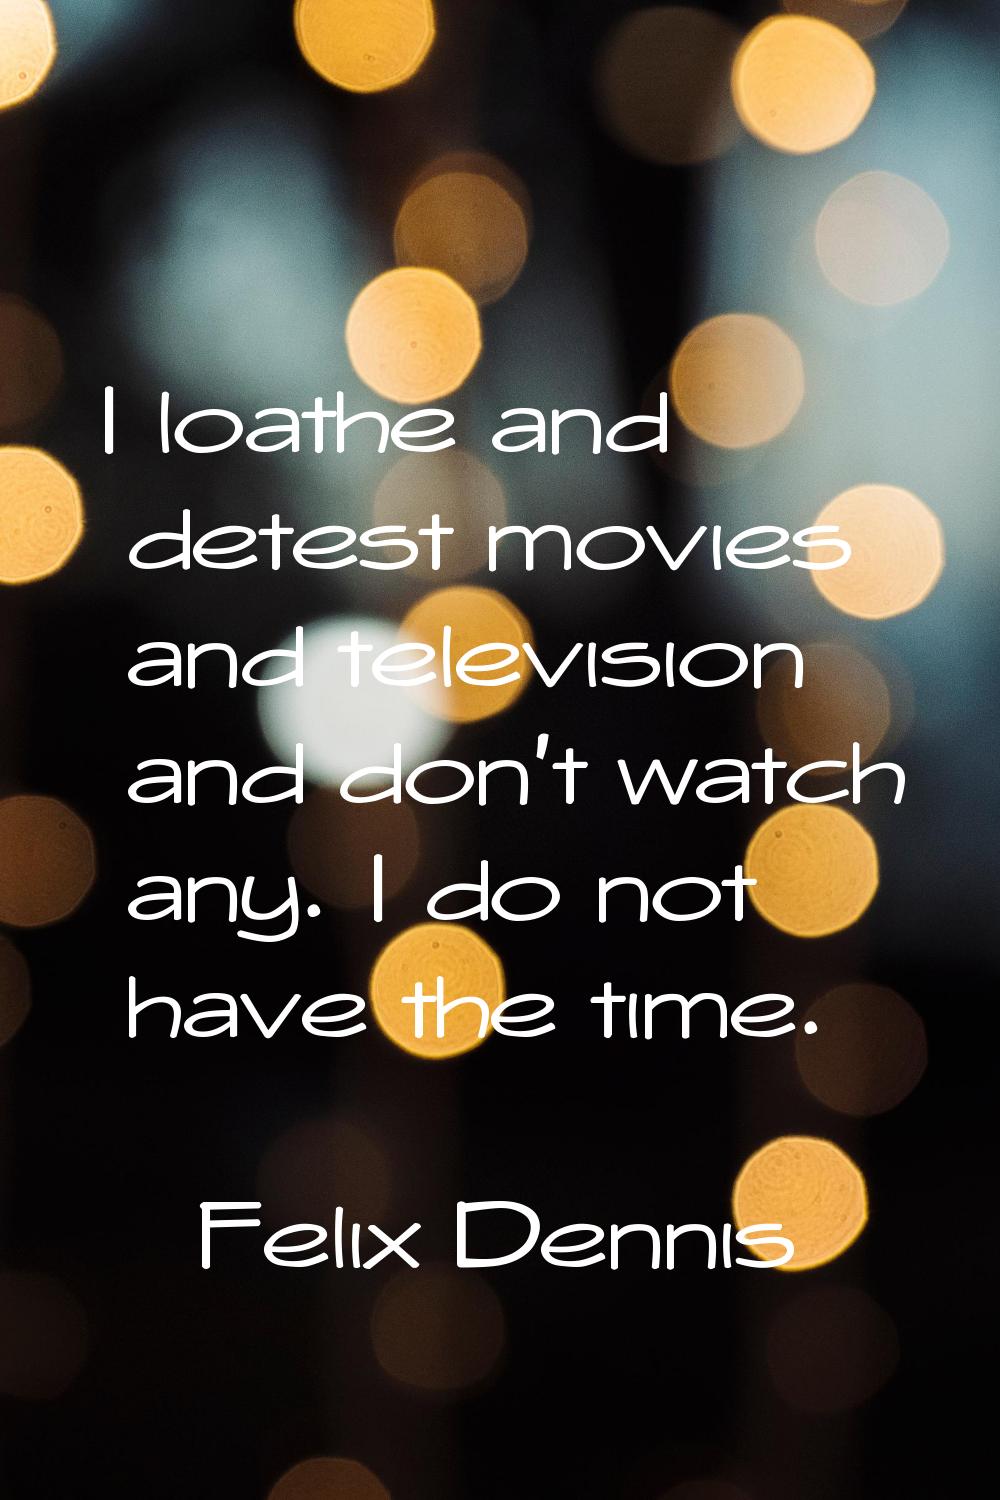 I loathe and detest movies and television and don't watch any. I do not have the time.